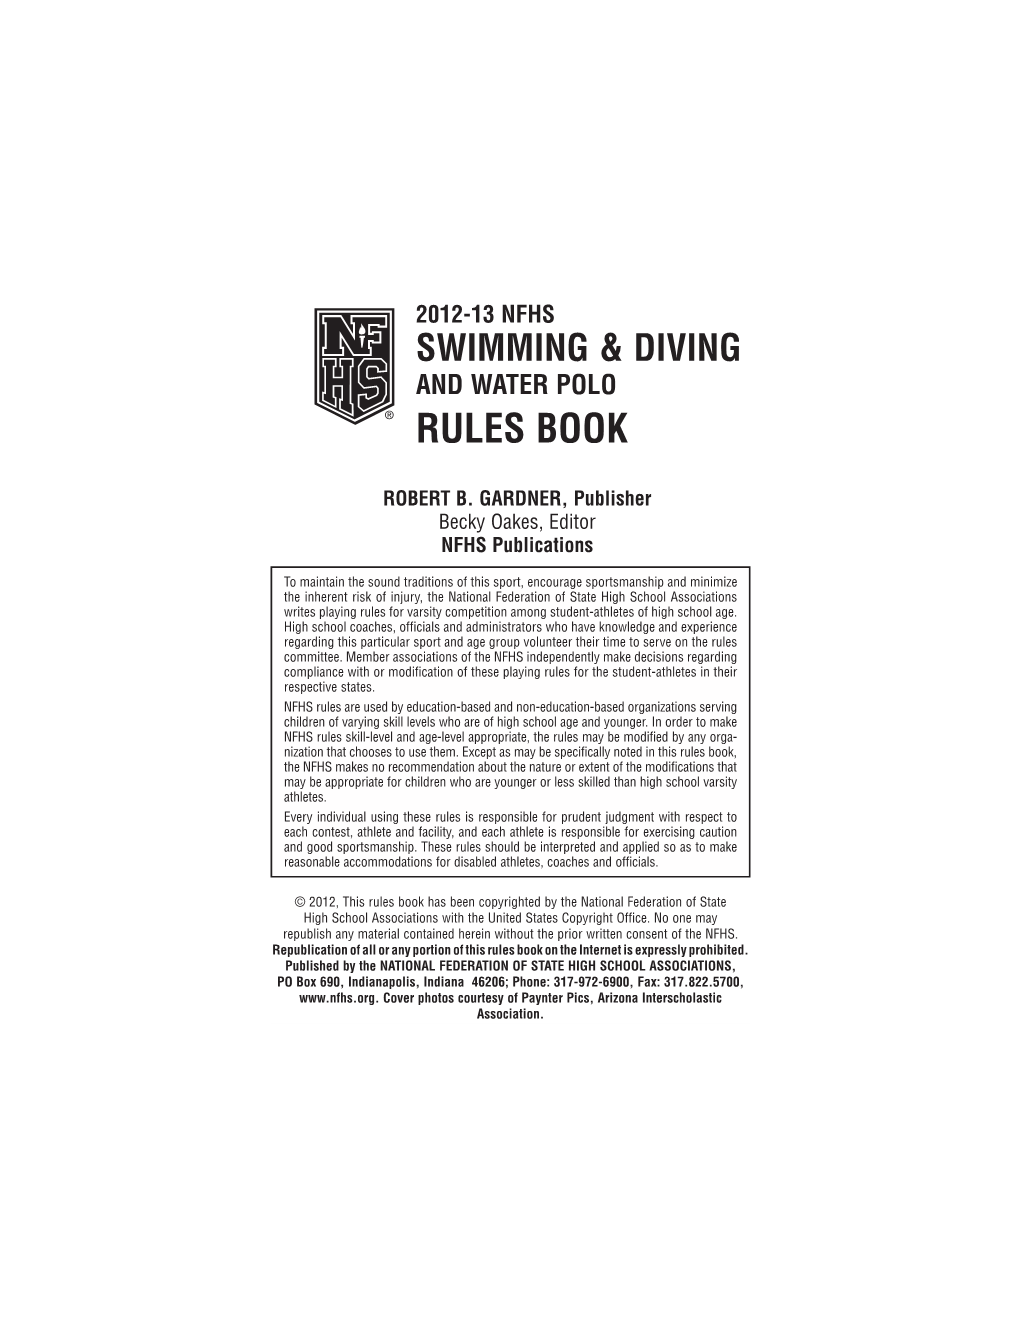 2012-13 Swimming Rules Book